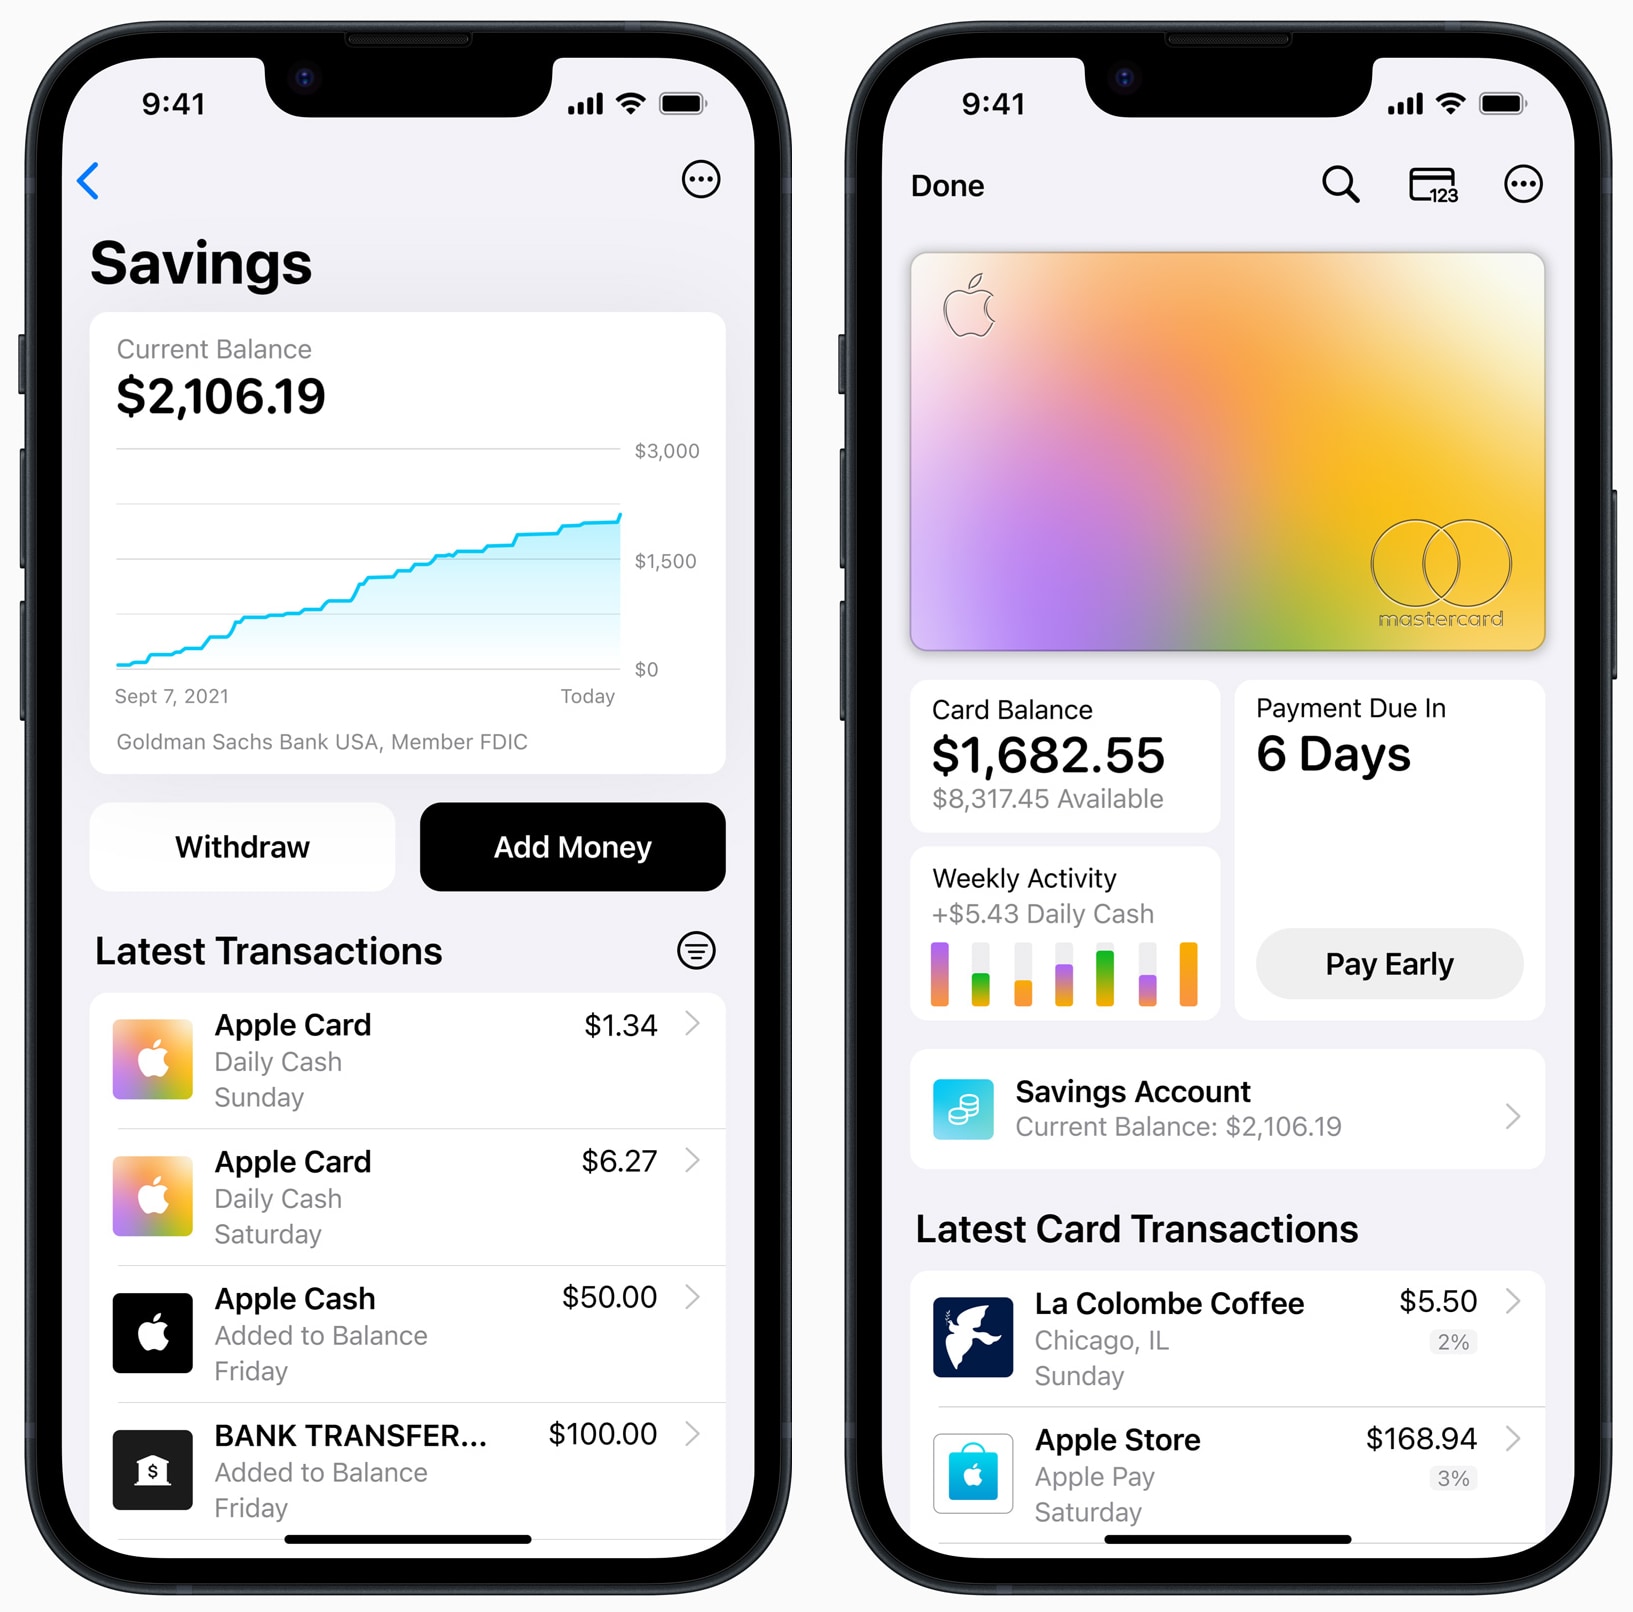 Apple Takes Another Step into the World of Banking - TidBITS